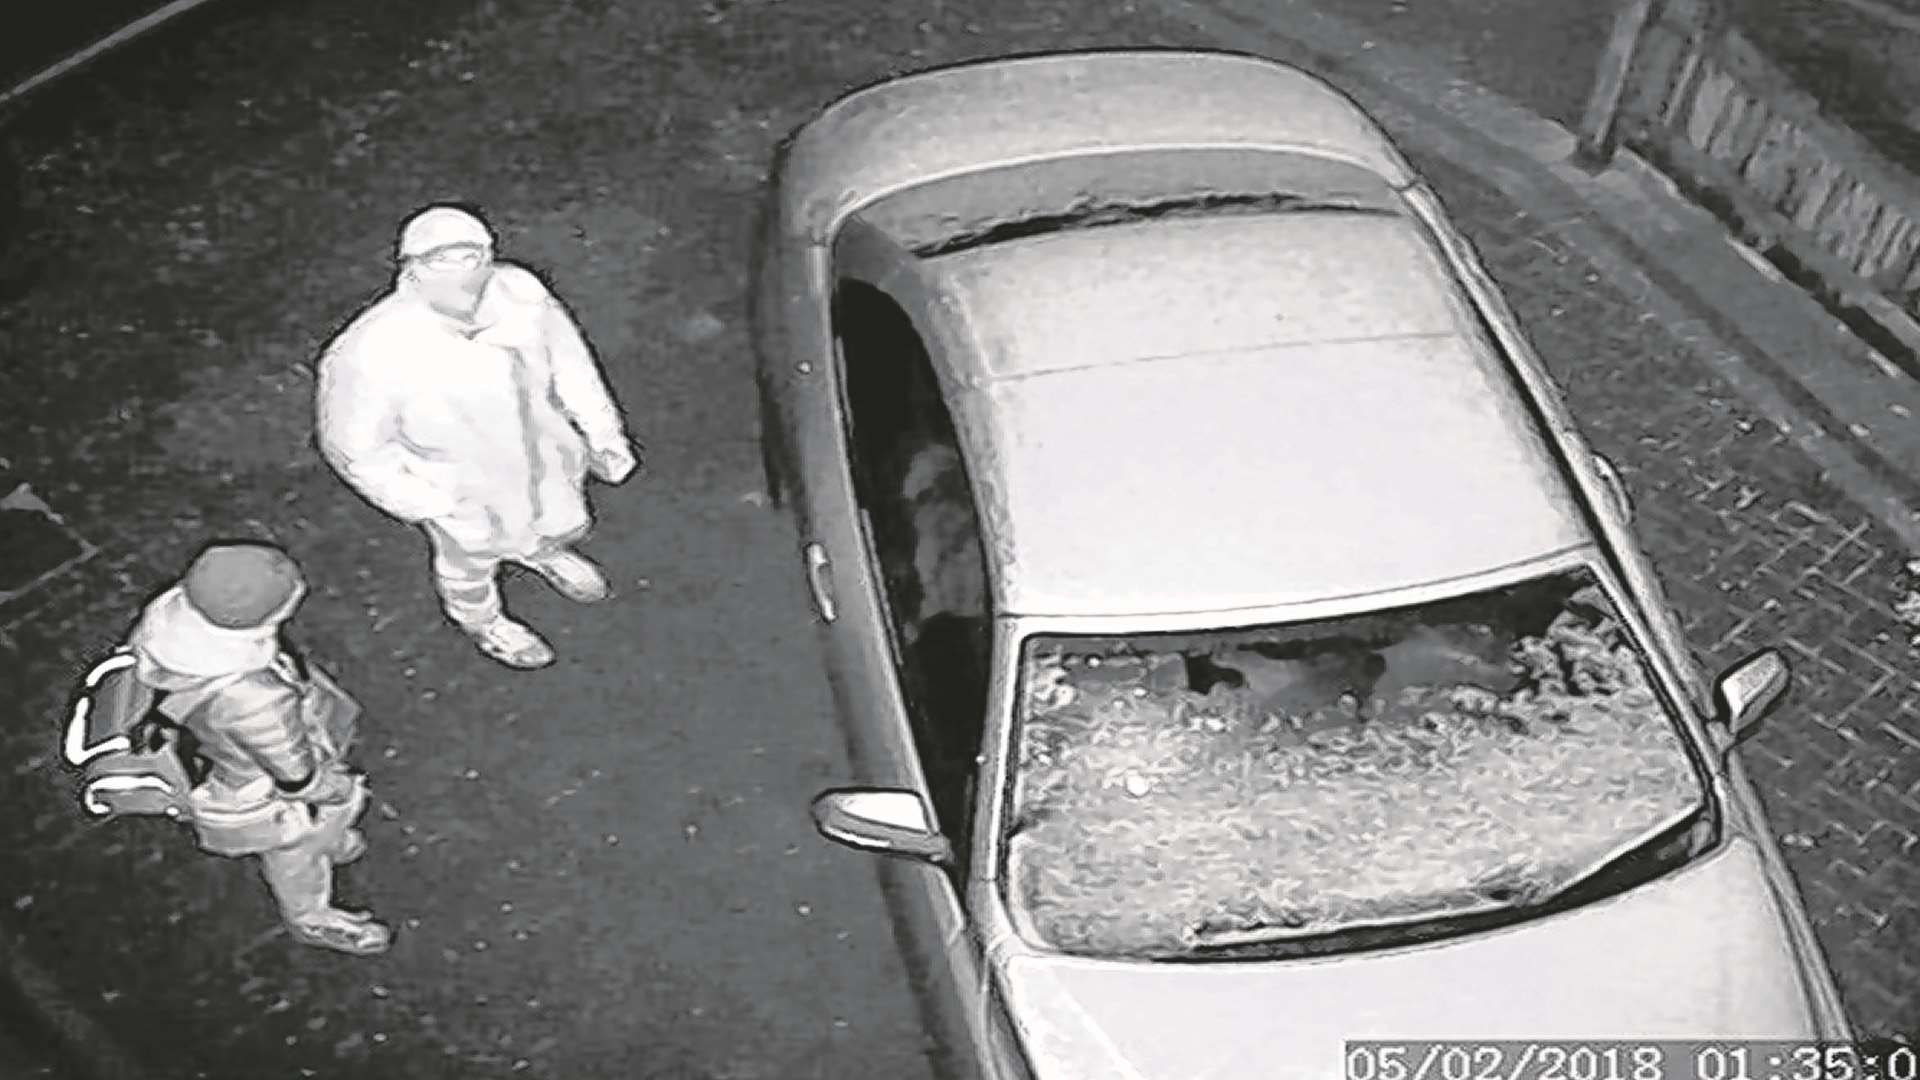 Thieves were seen approaching the vehicle.